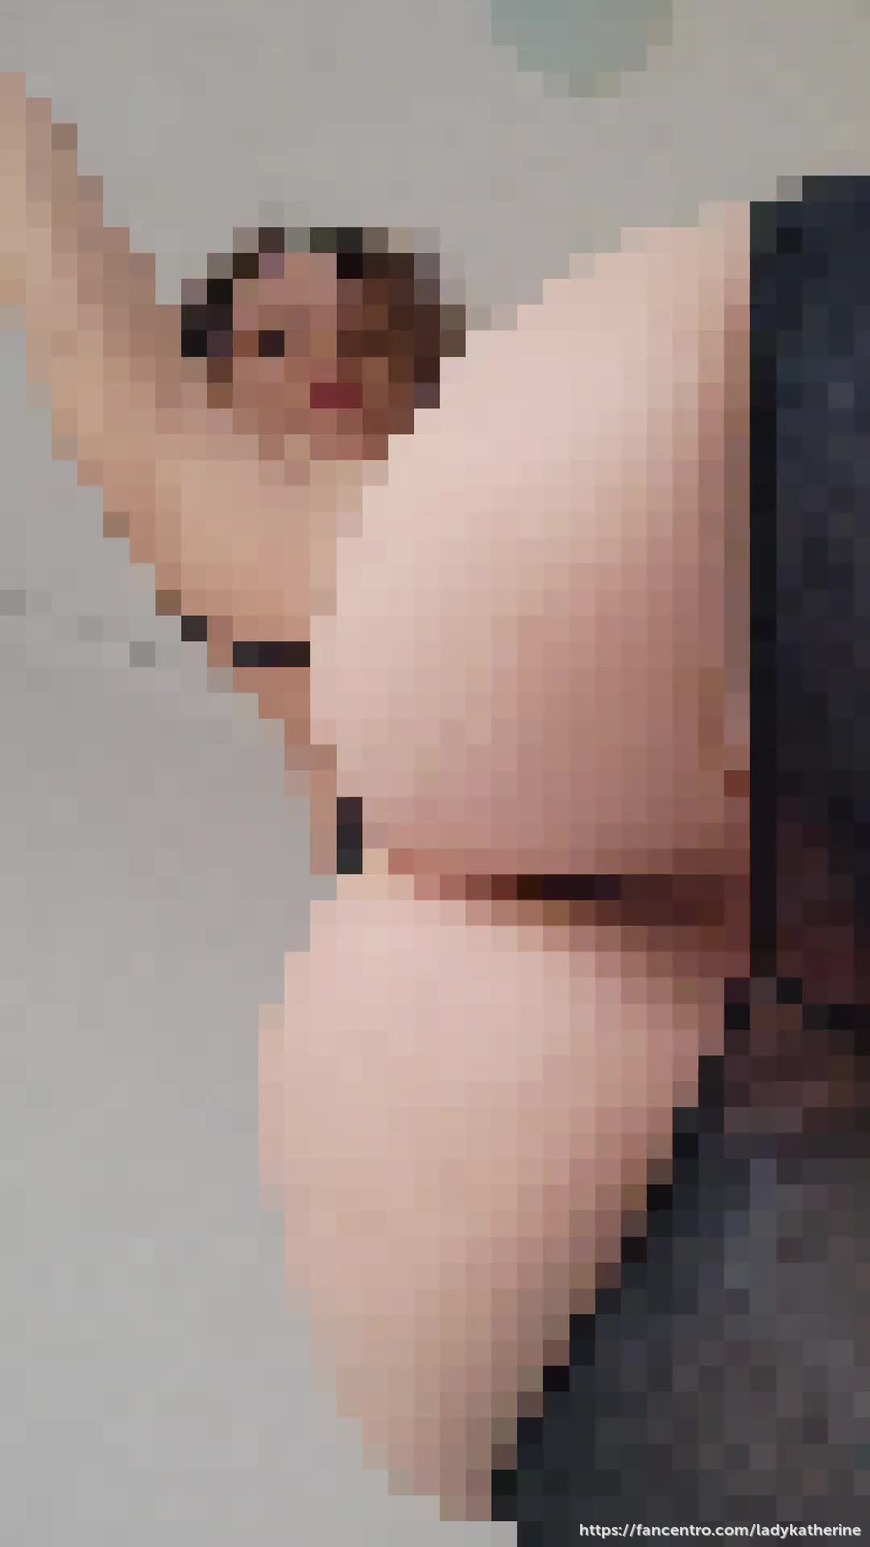 Offer your money willingly and then kiss my pixelated ass for the privilege.